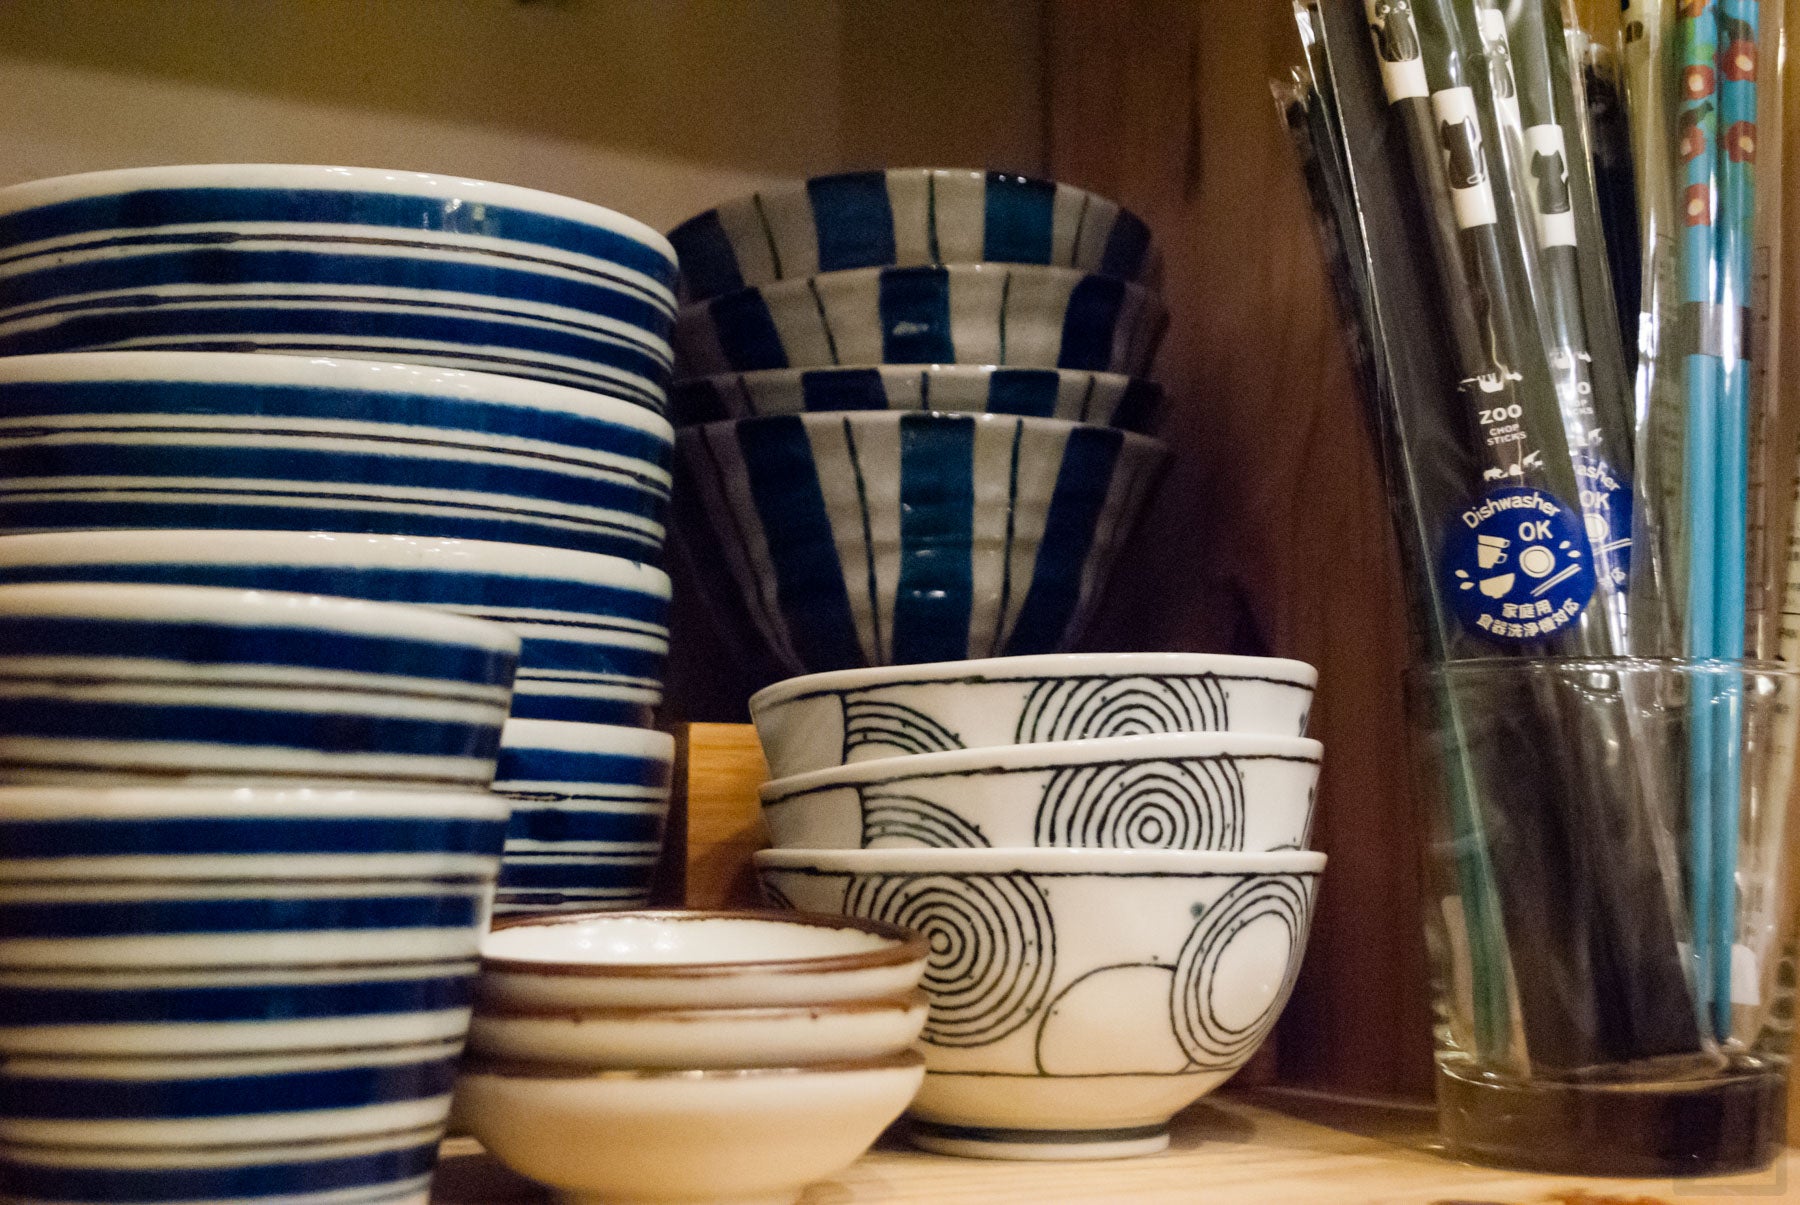 Our humble line-up of Japanese ceramics, perfect for everyday use